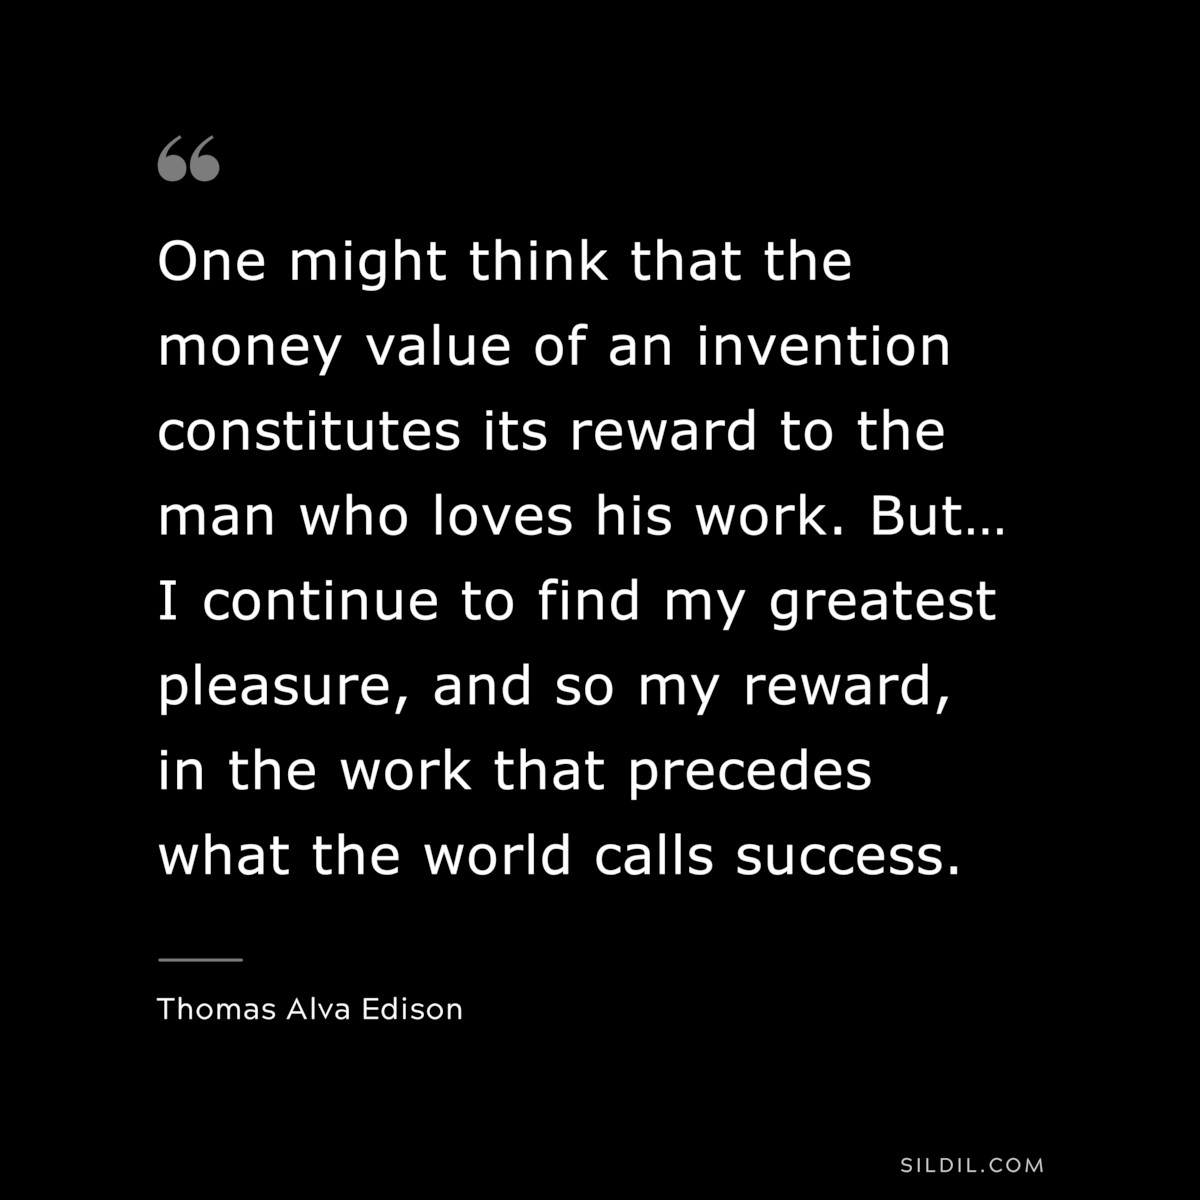 One might think that the money value of an invention constitutes its reward to the man who loves his work. But… I continue to find my greatest pleasure, and so my reward, in the work that precedes what the world calls success. ― Thomas Alva Edison